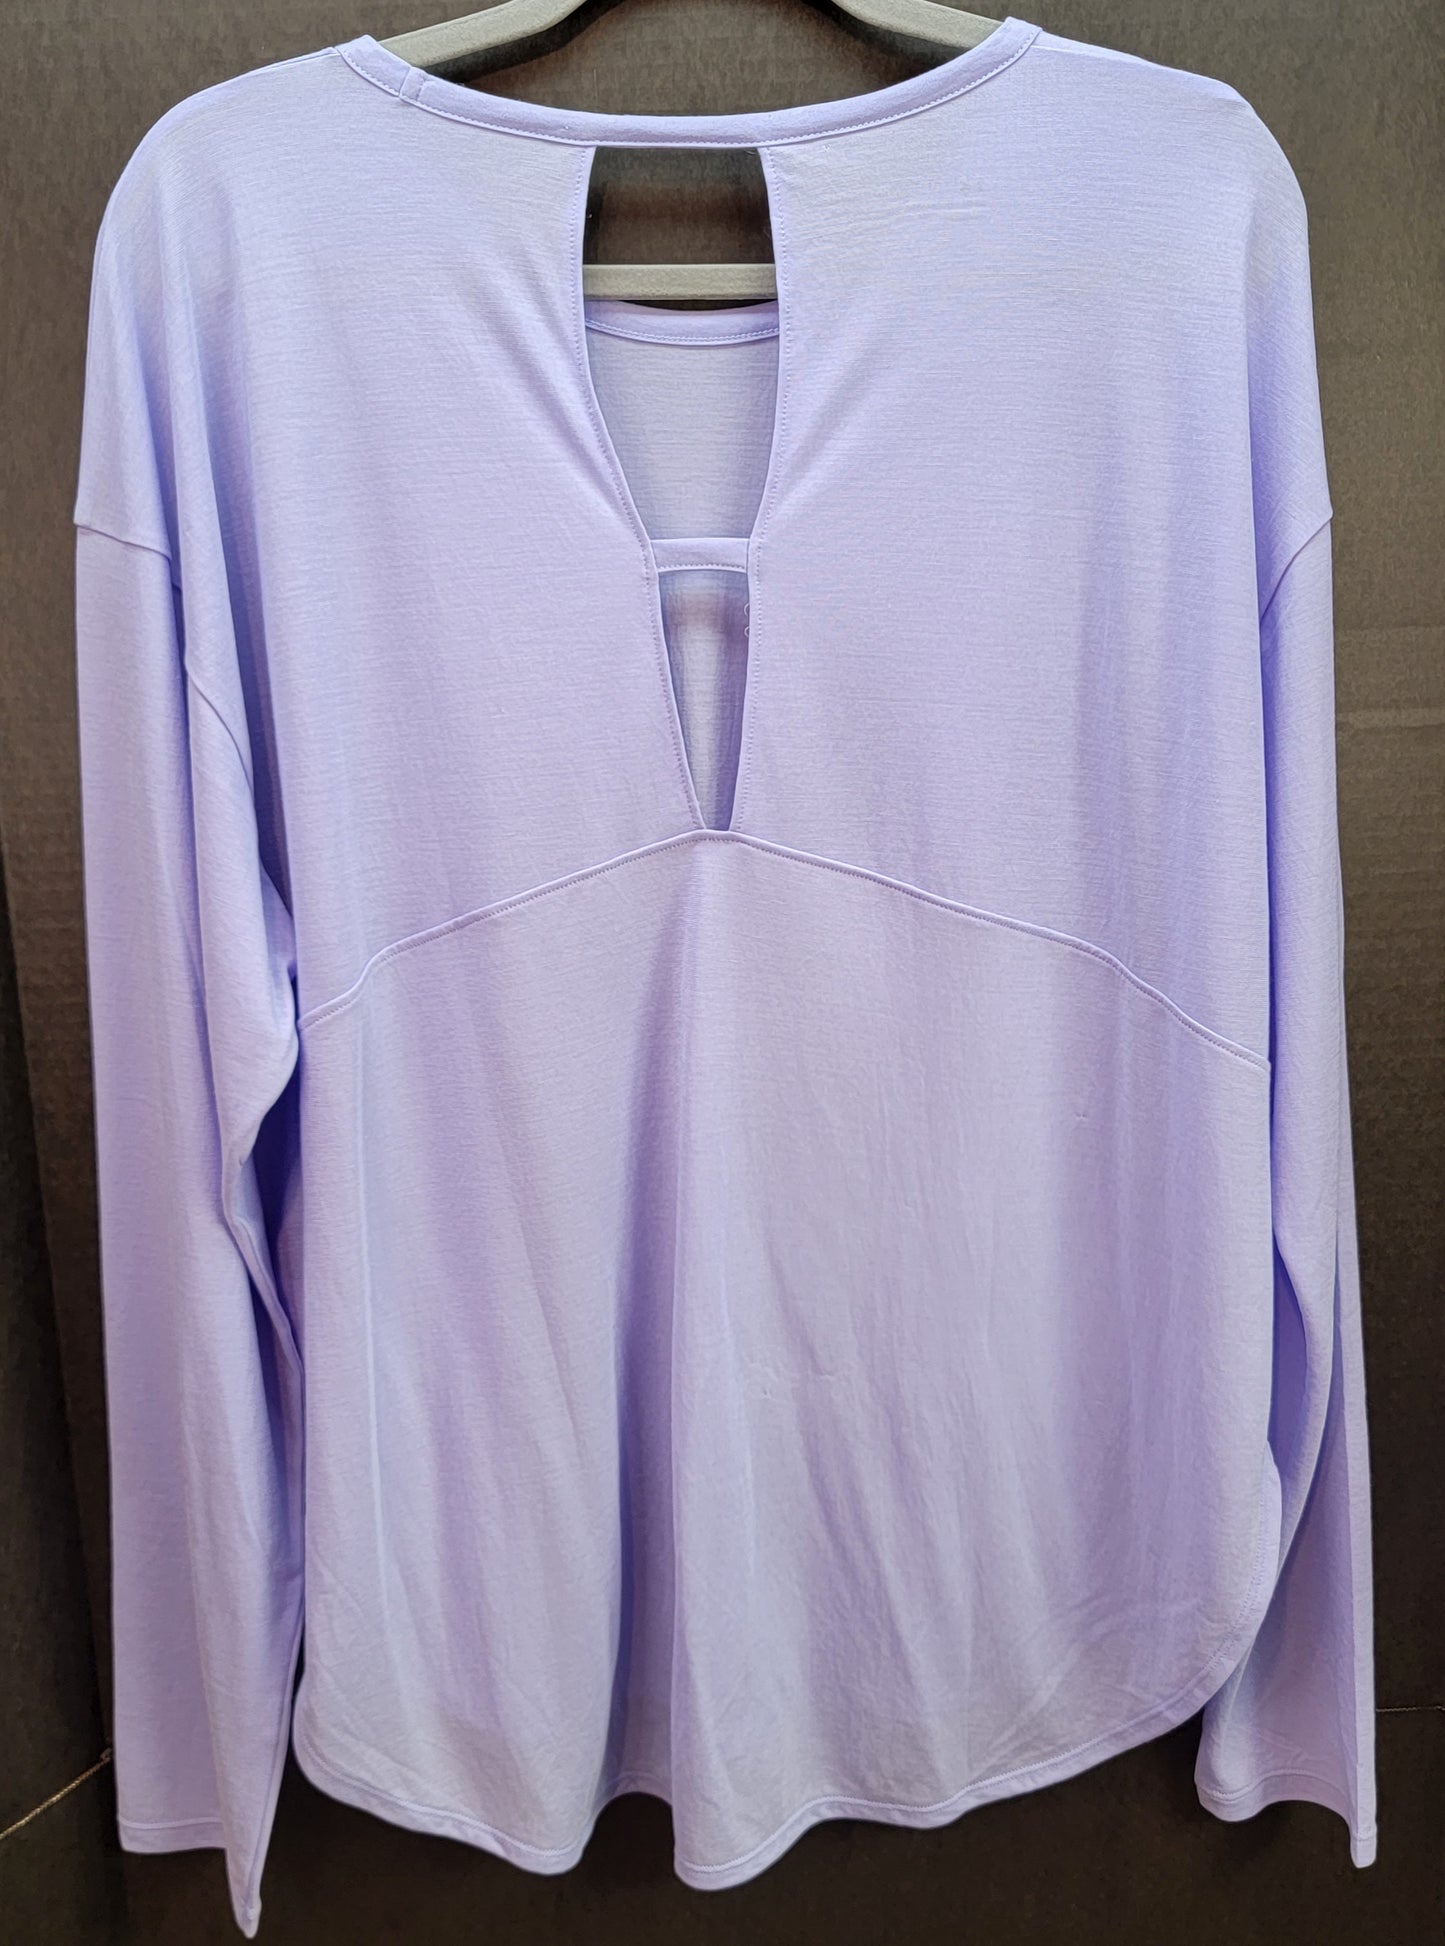 Under Armour Womens Long Sleeve Shirt Loose Fit Size XL Purple Retail $39.99 New with Tags